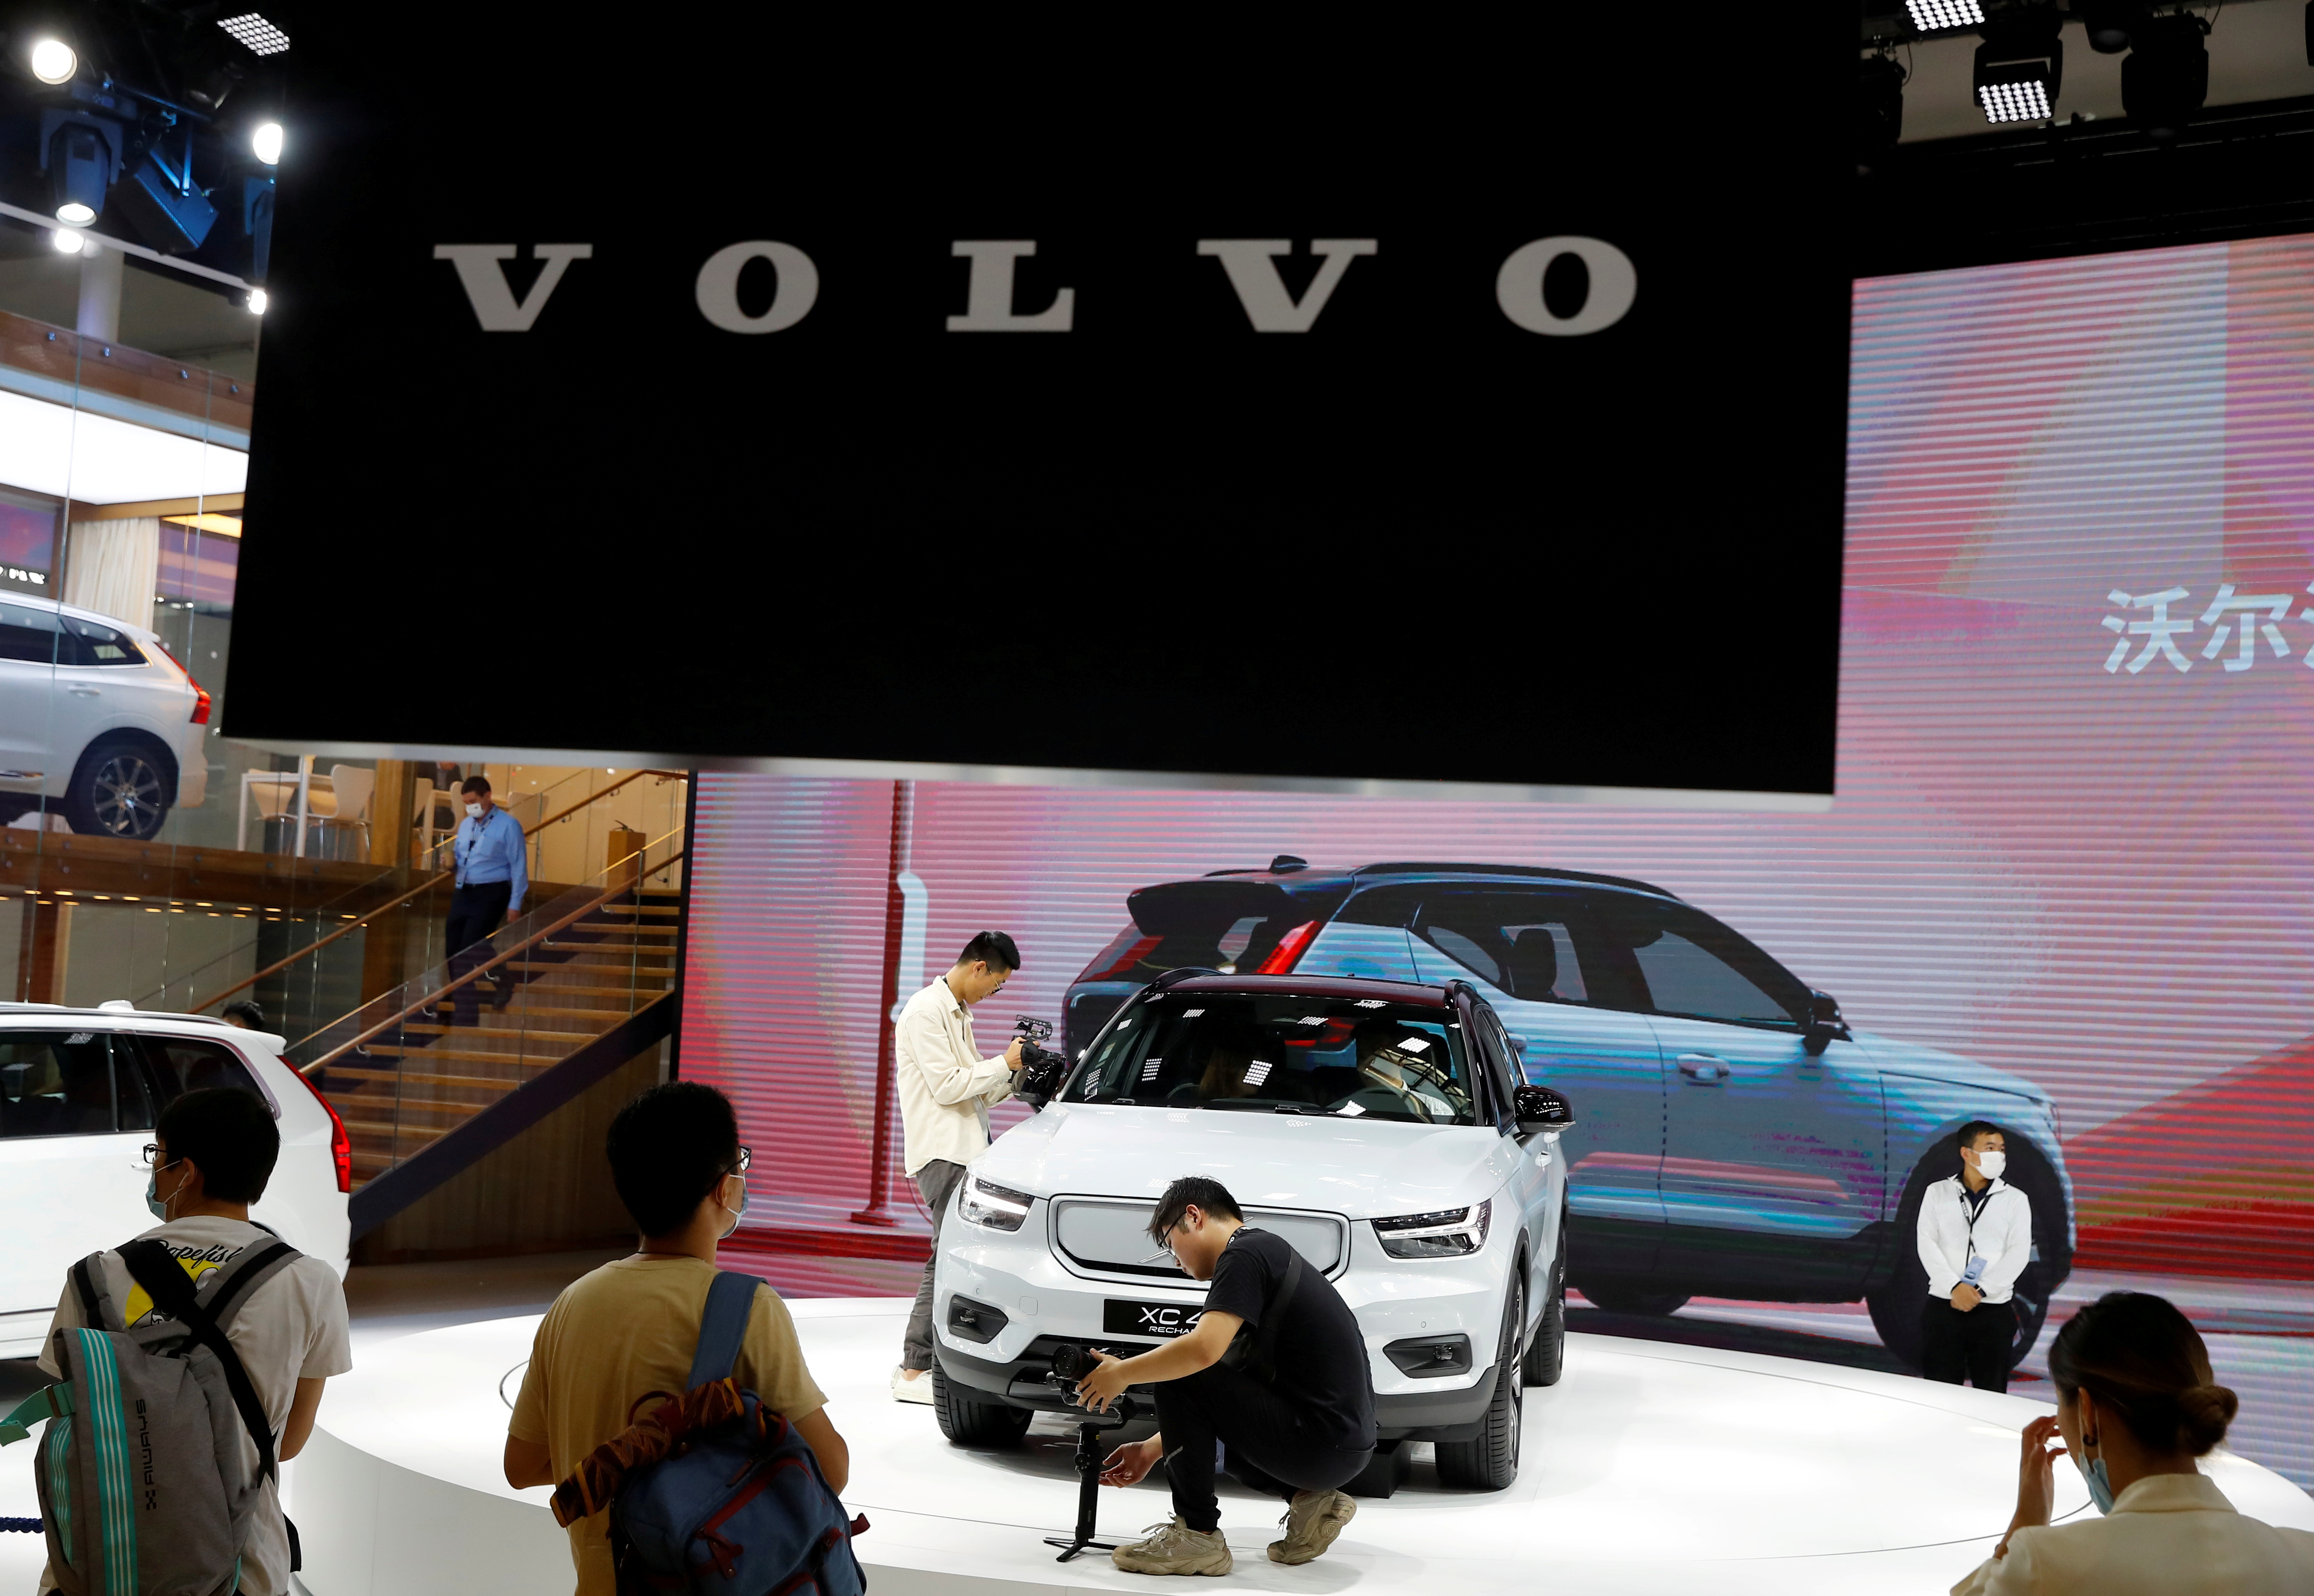 People look at a Volvo XC40 car during the Beijing International Automotive Exhibition, or Auto China show, in Beijing, China September 26, 2020. REUTERS/Thomas Peter/File Photo